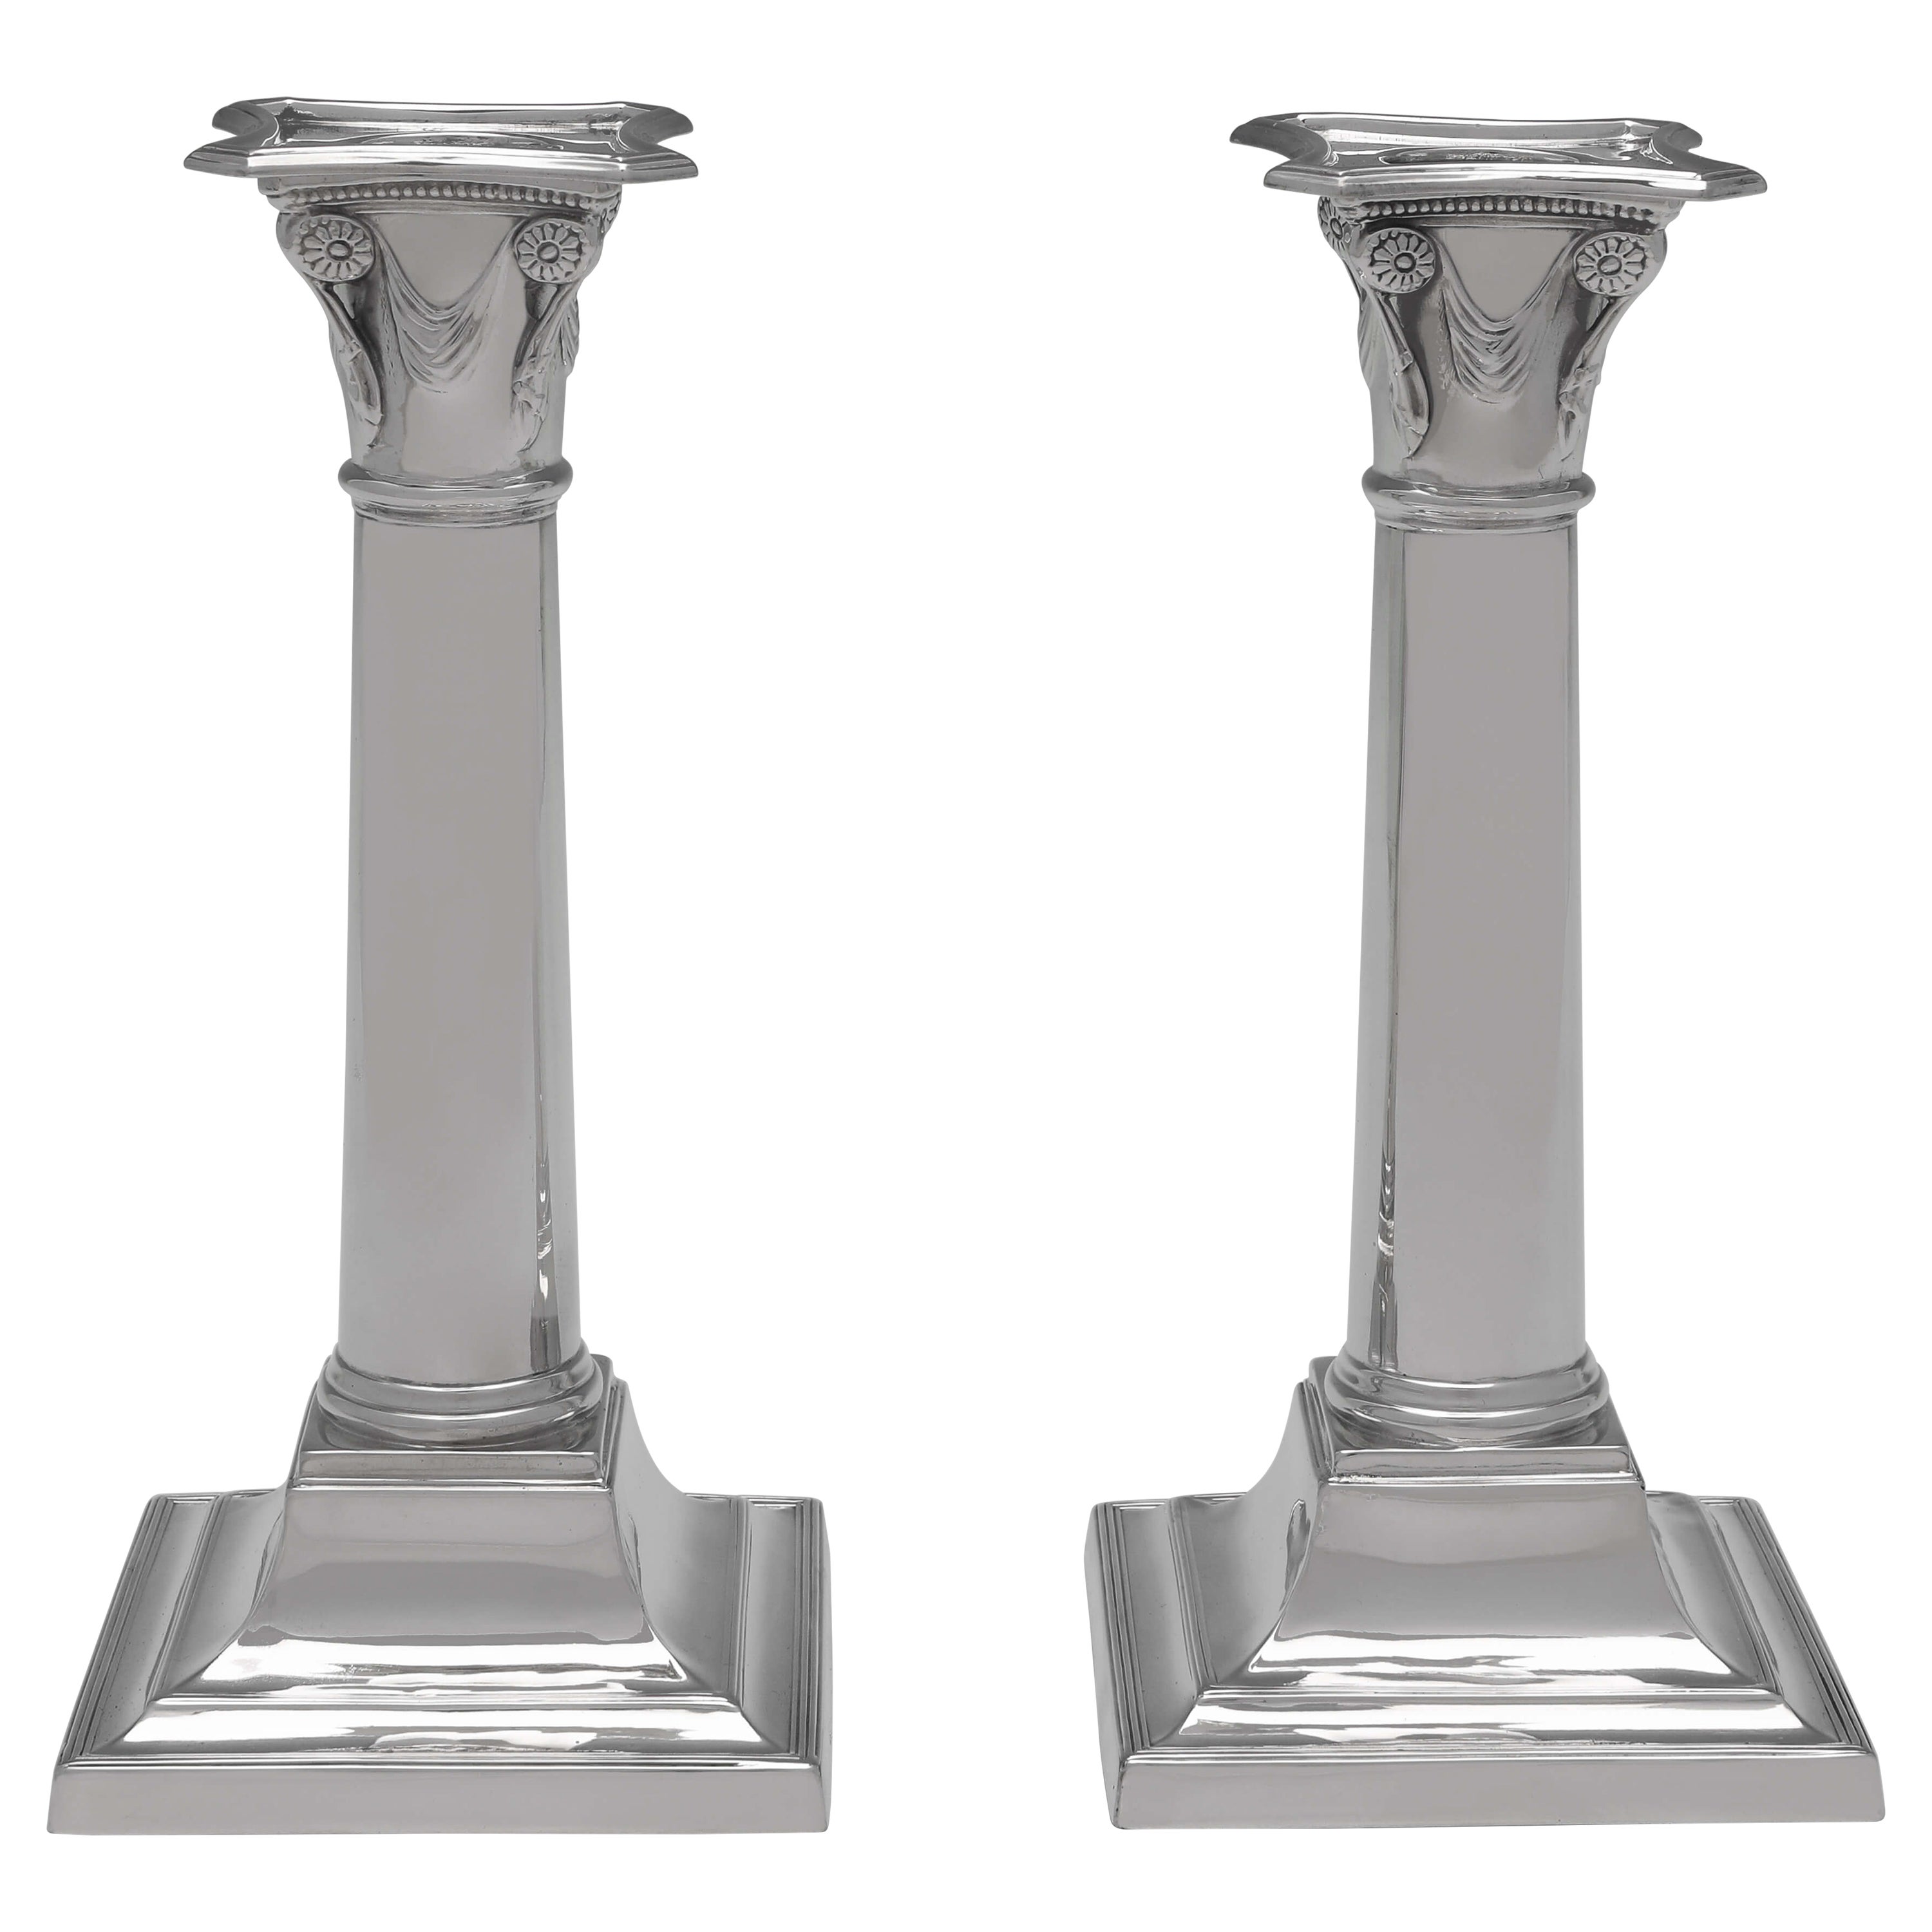 Neoclassical Revival Sterling Silver Pair of Candlesticks, Sheffield 1921